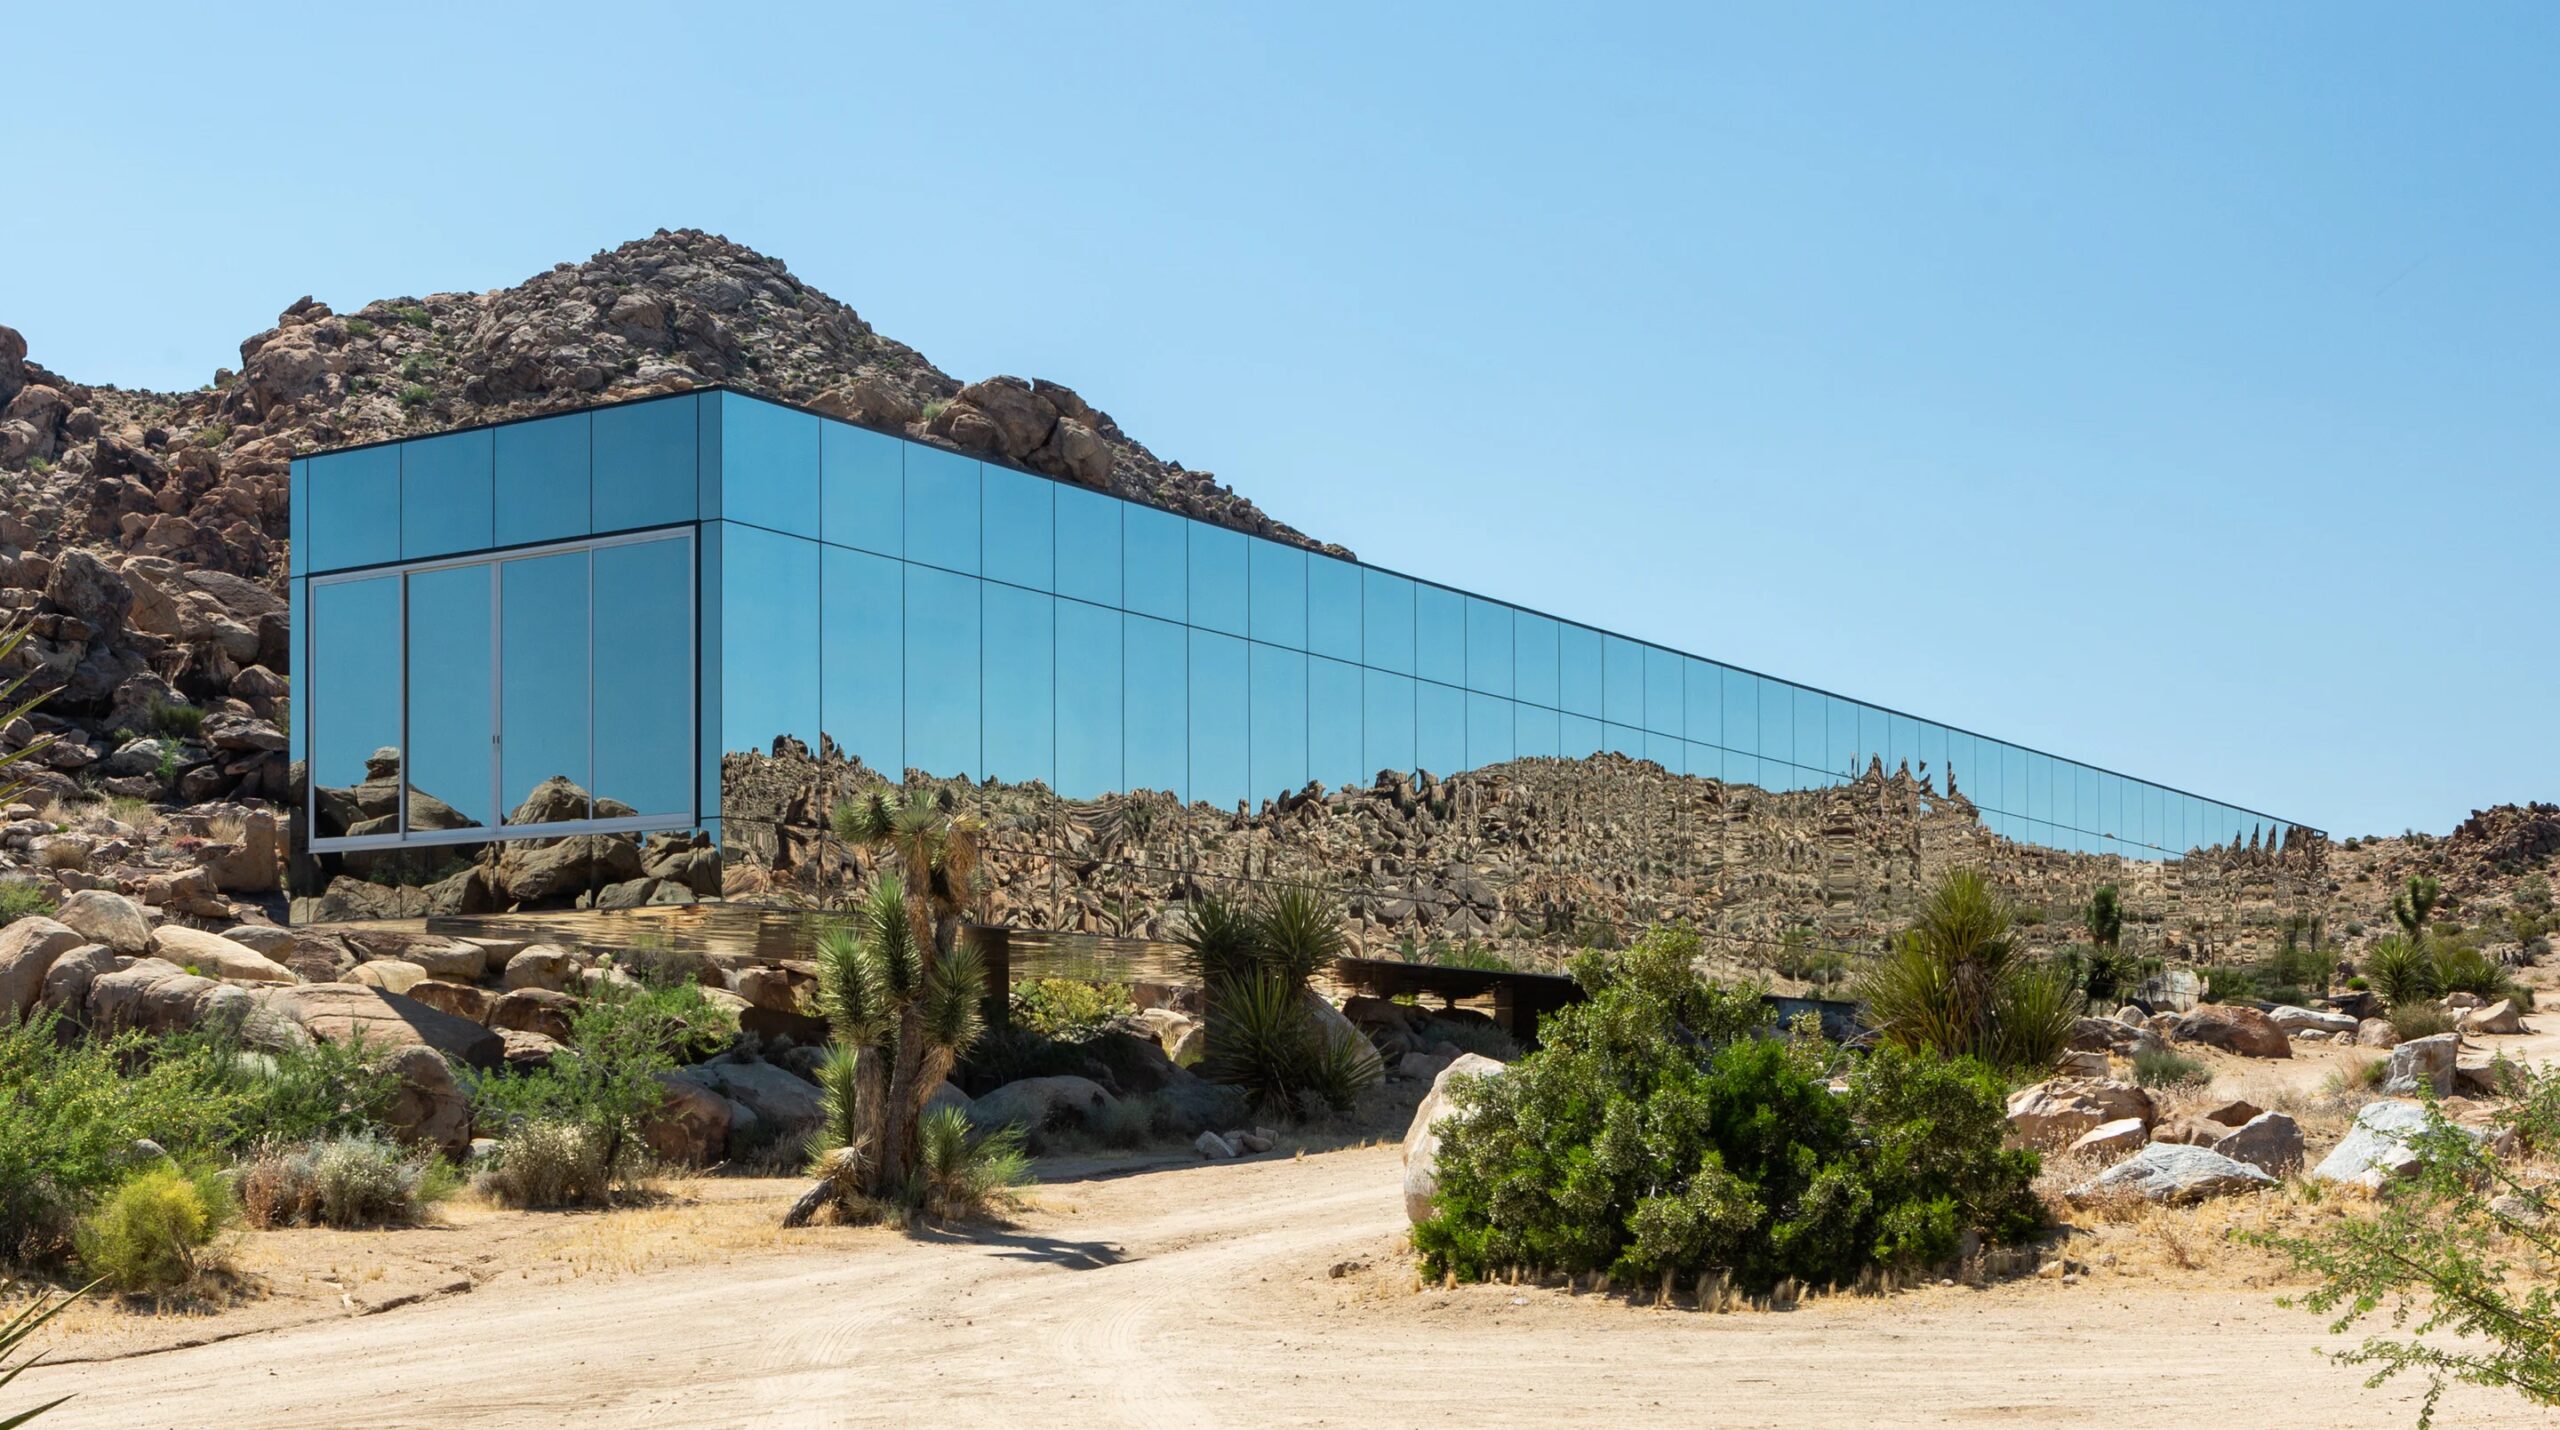 Exterior view of a long mirrored vacation rental home called Invisible House set in the desert near Joshua Tree National Park, California.